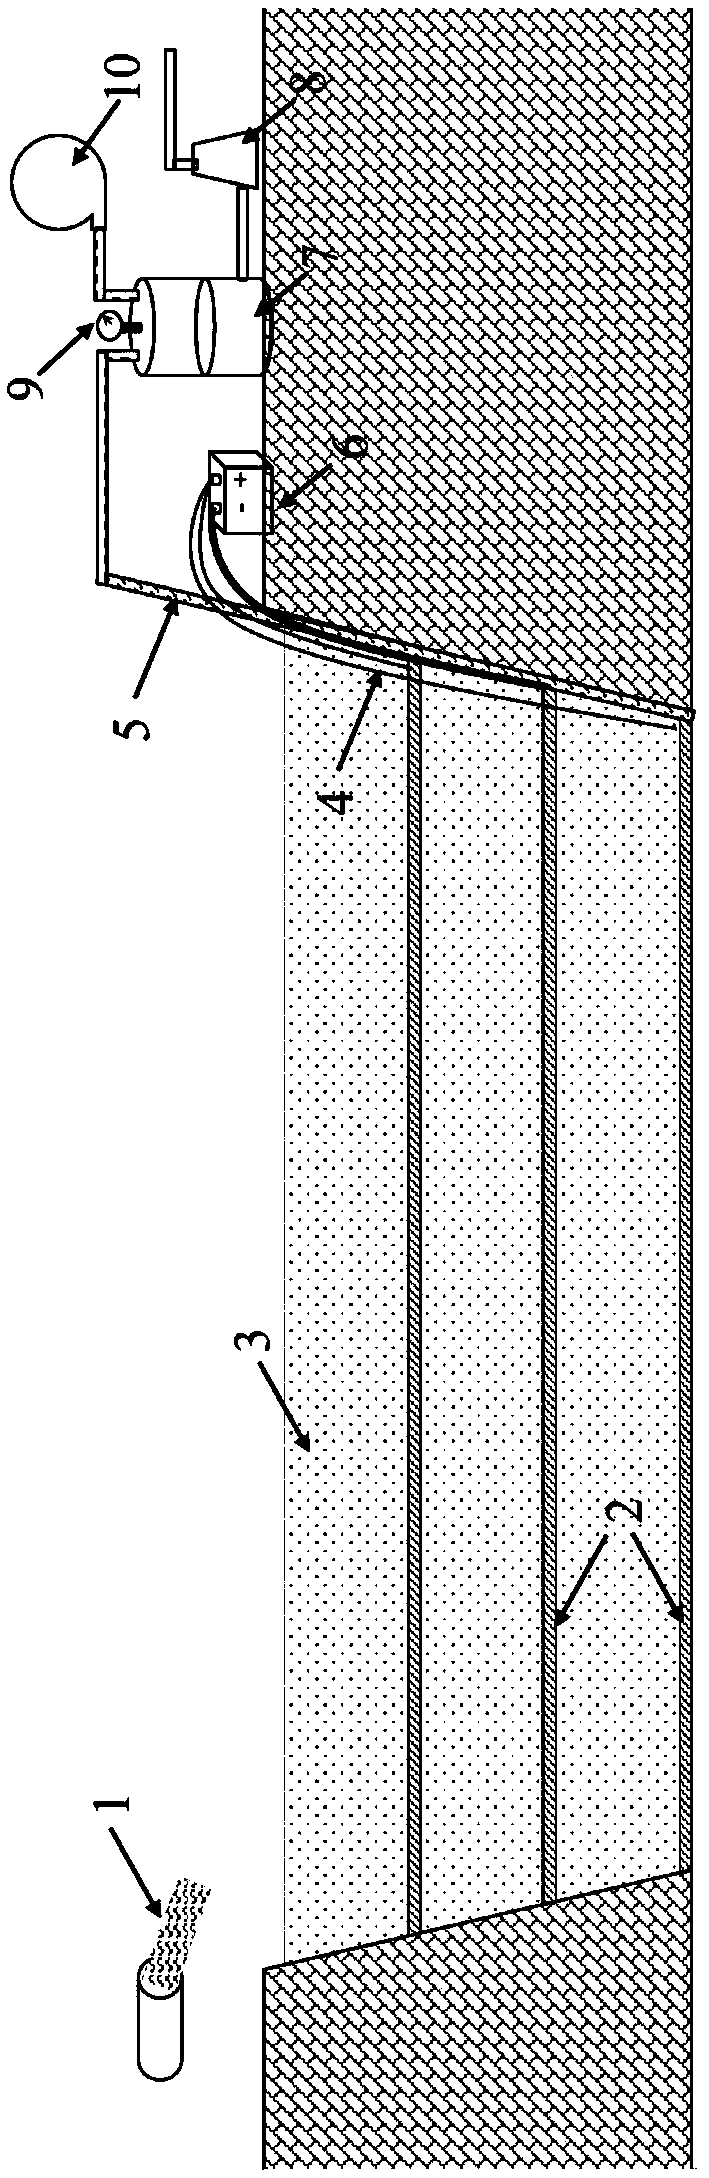 Apparatus for reinforcing hydraulically filled soft soil by means of horizontal vacuum preloading and electroosmosis combined mode and method